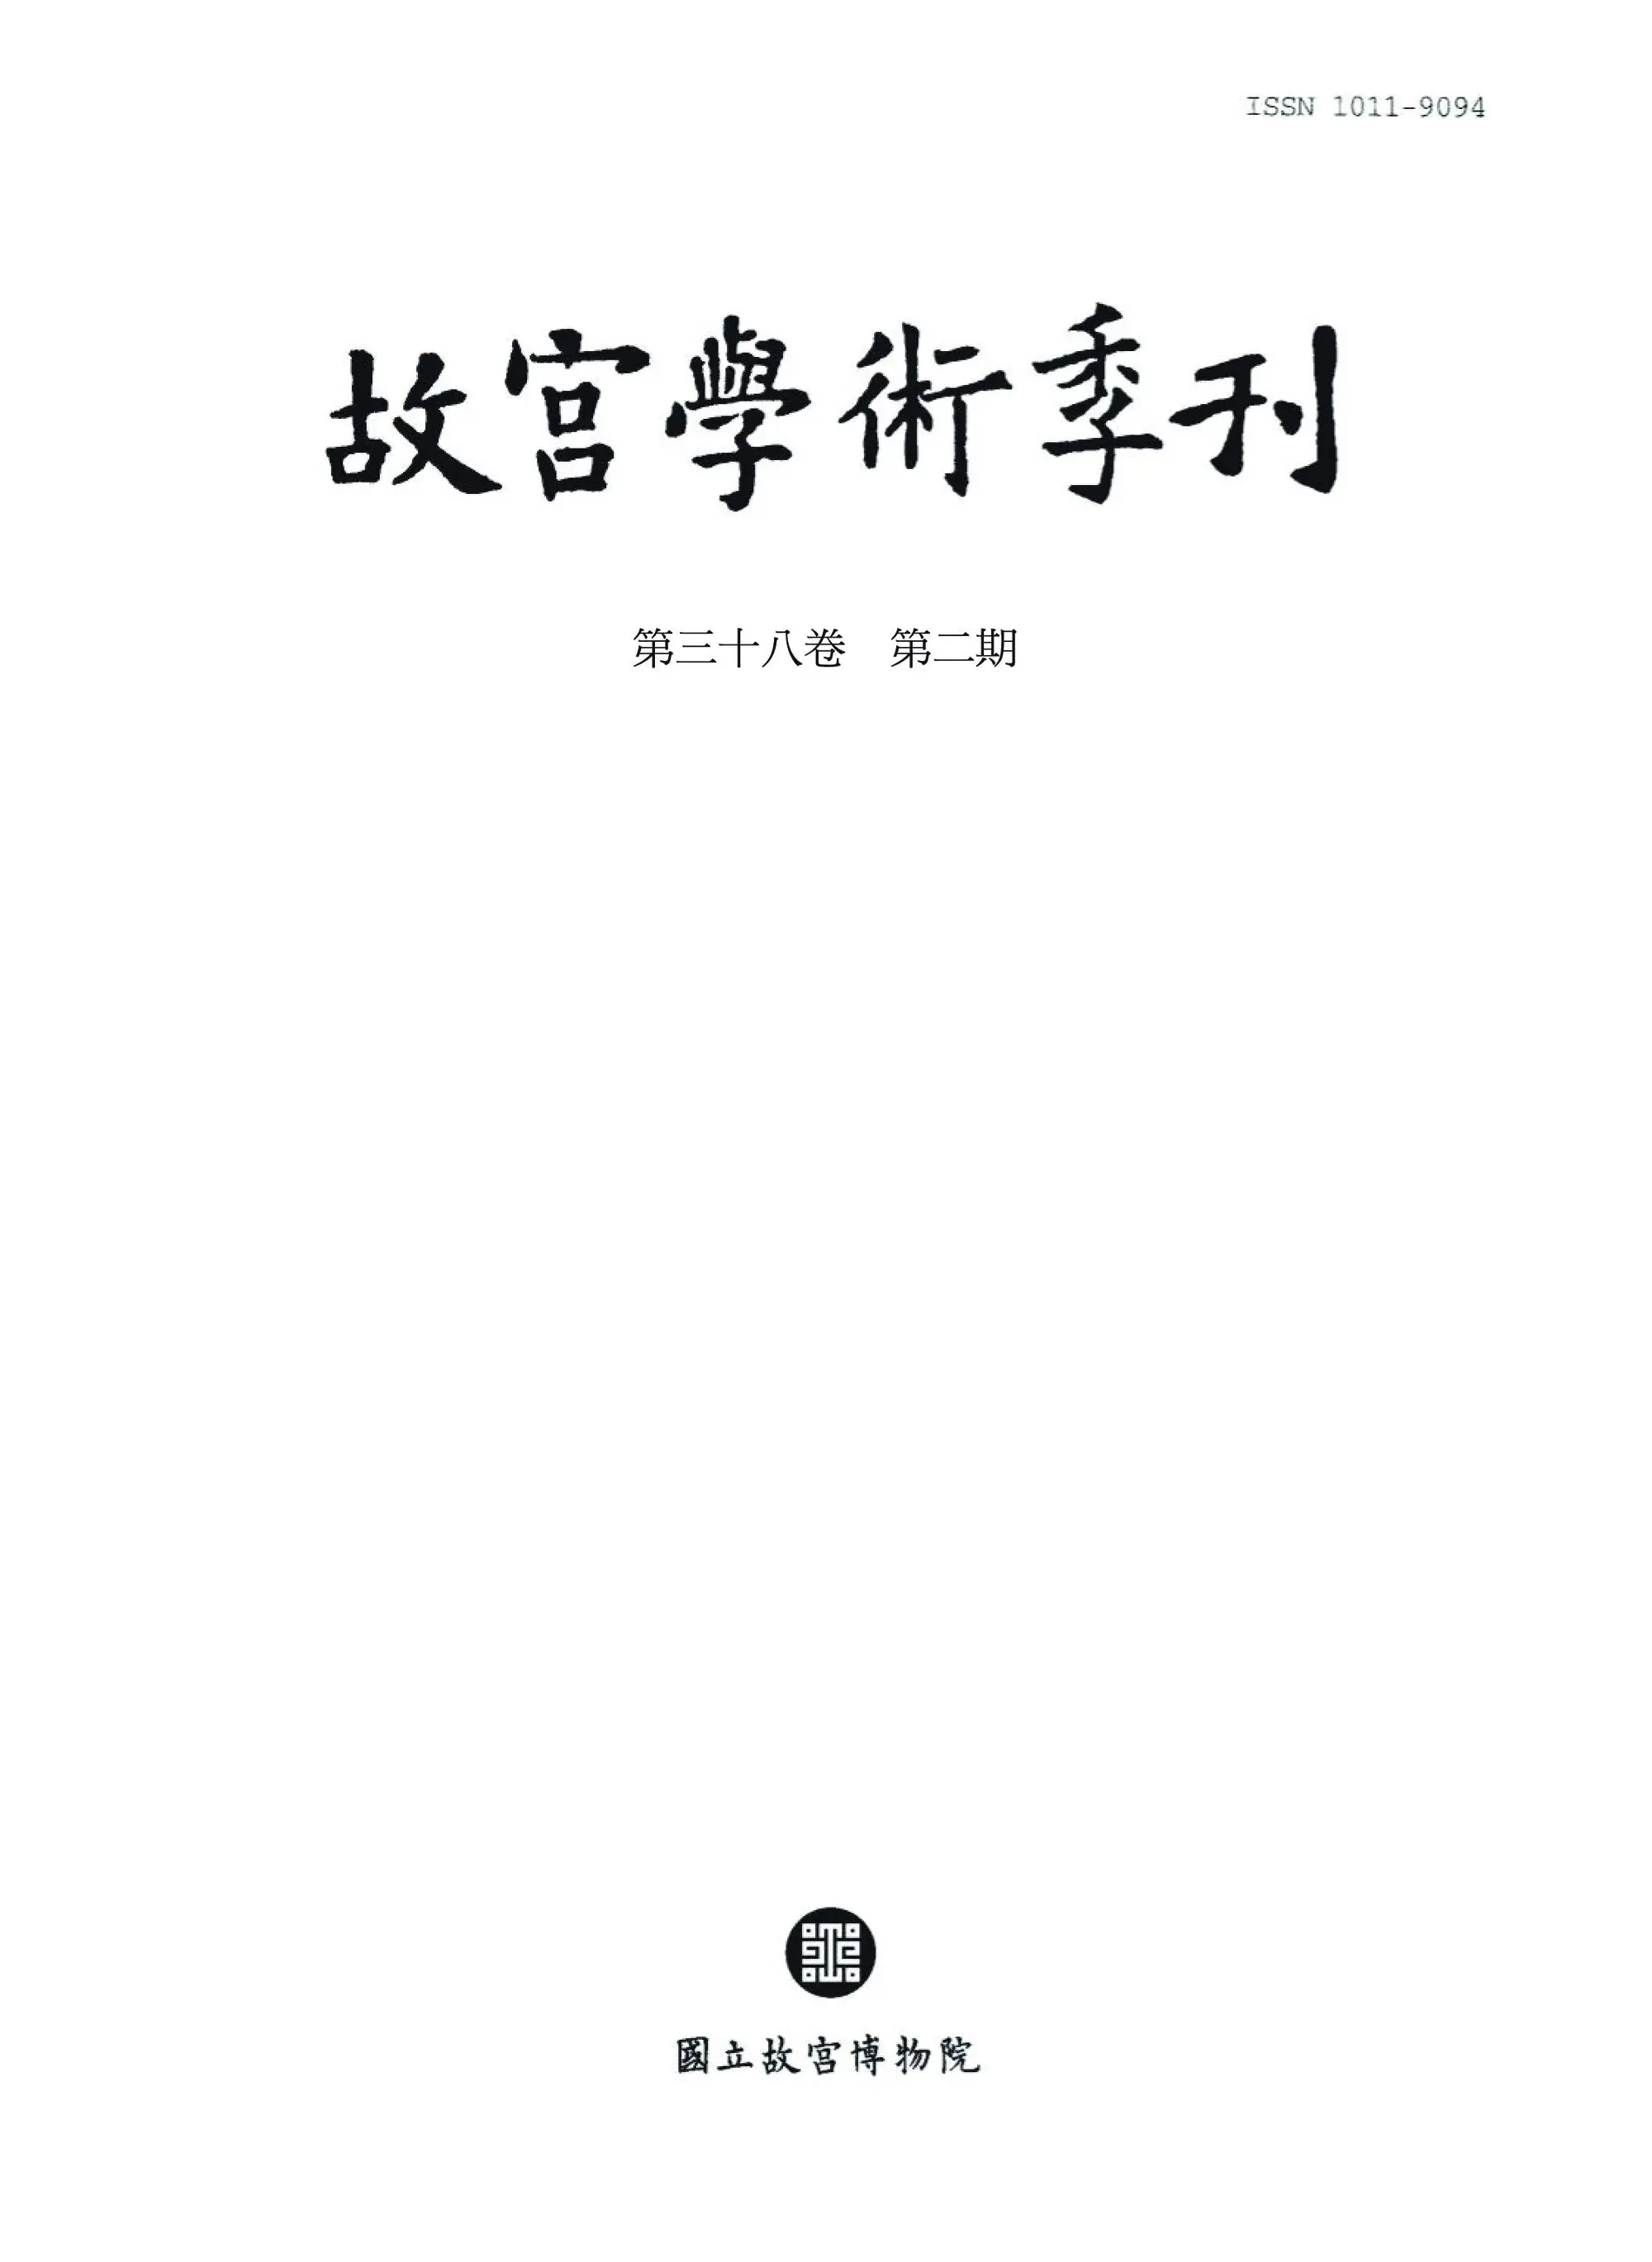 The National Palace Museum Research Quarterly 故宮學術季刊 – 01 四月 2021